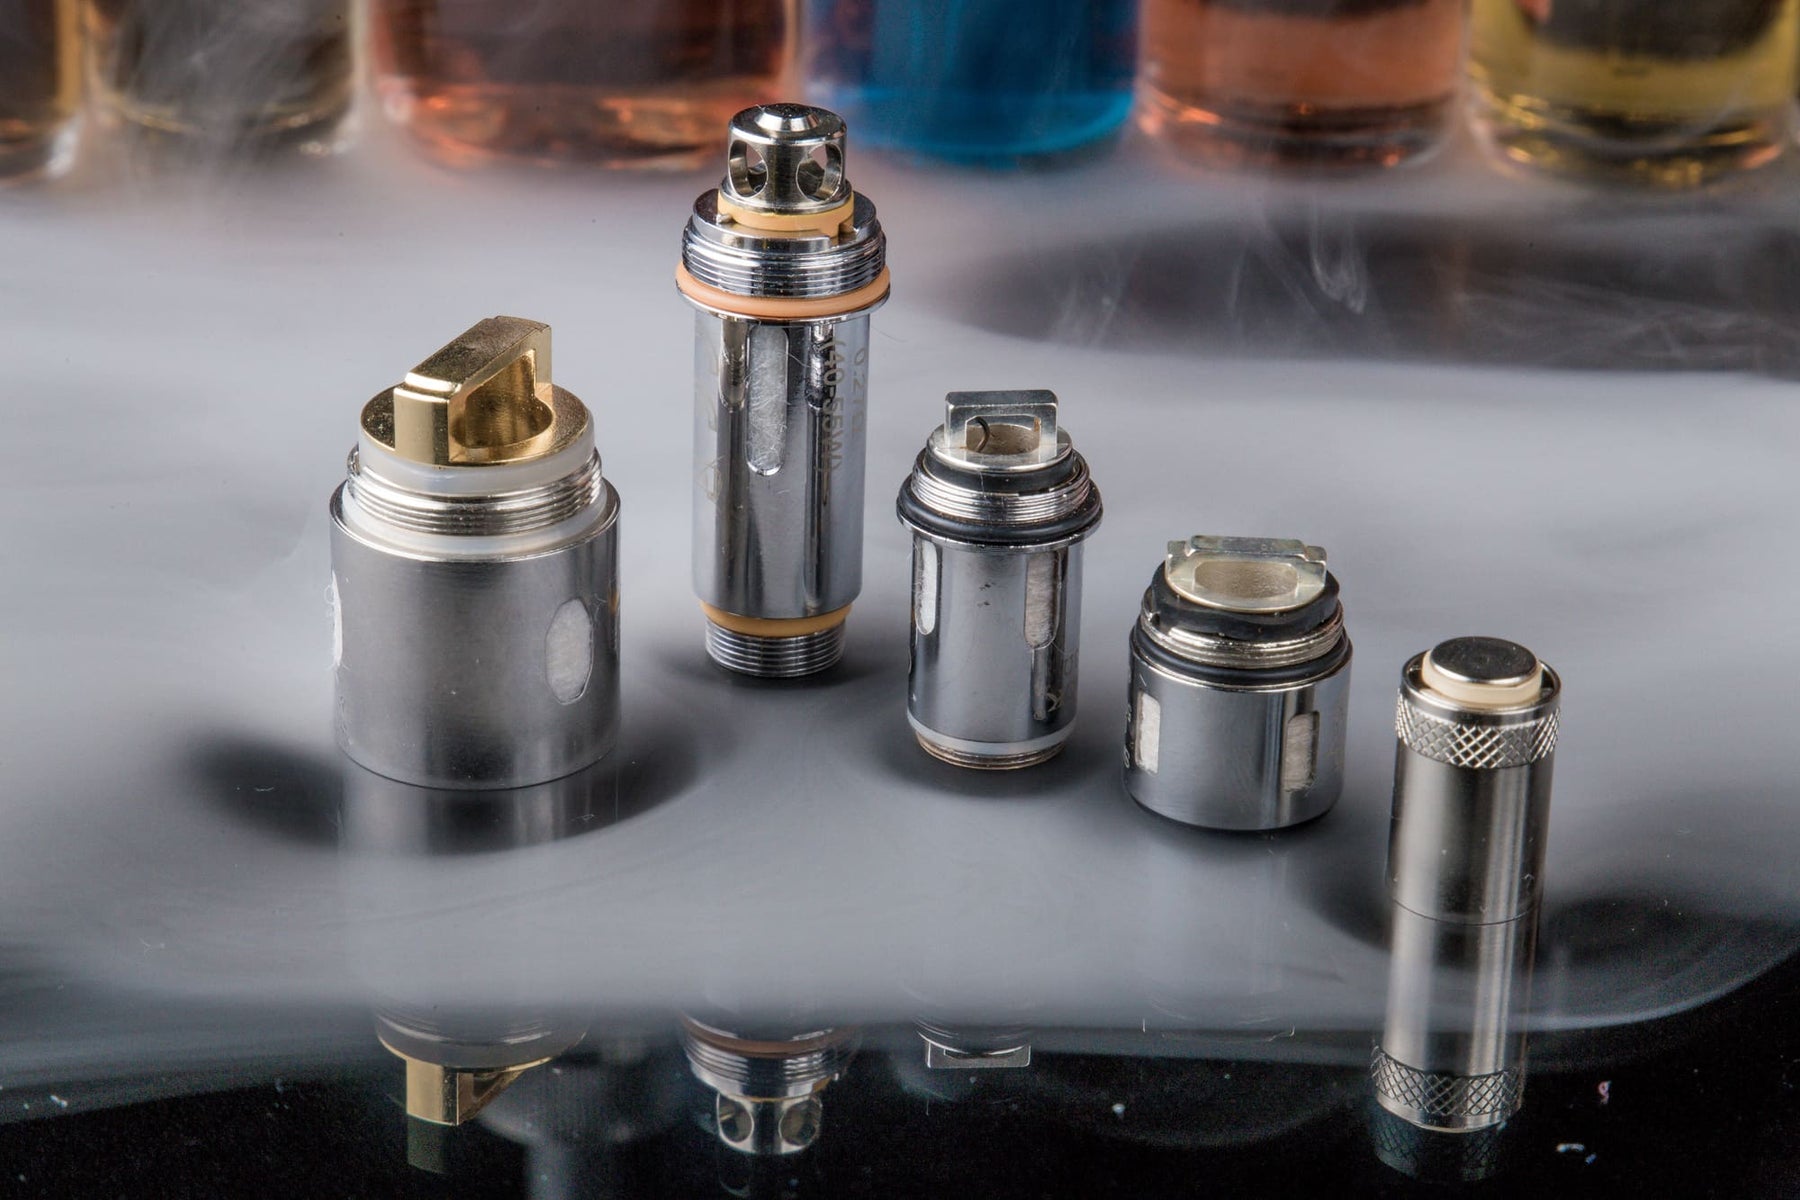 Vape Parts Exposed